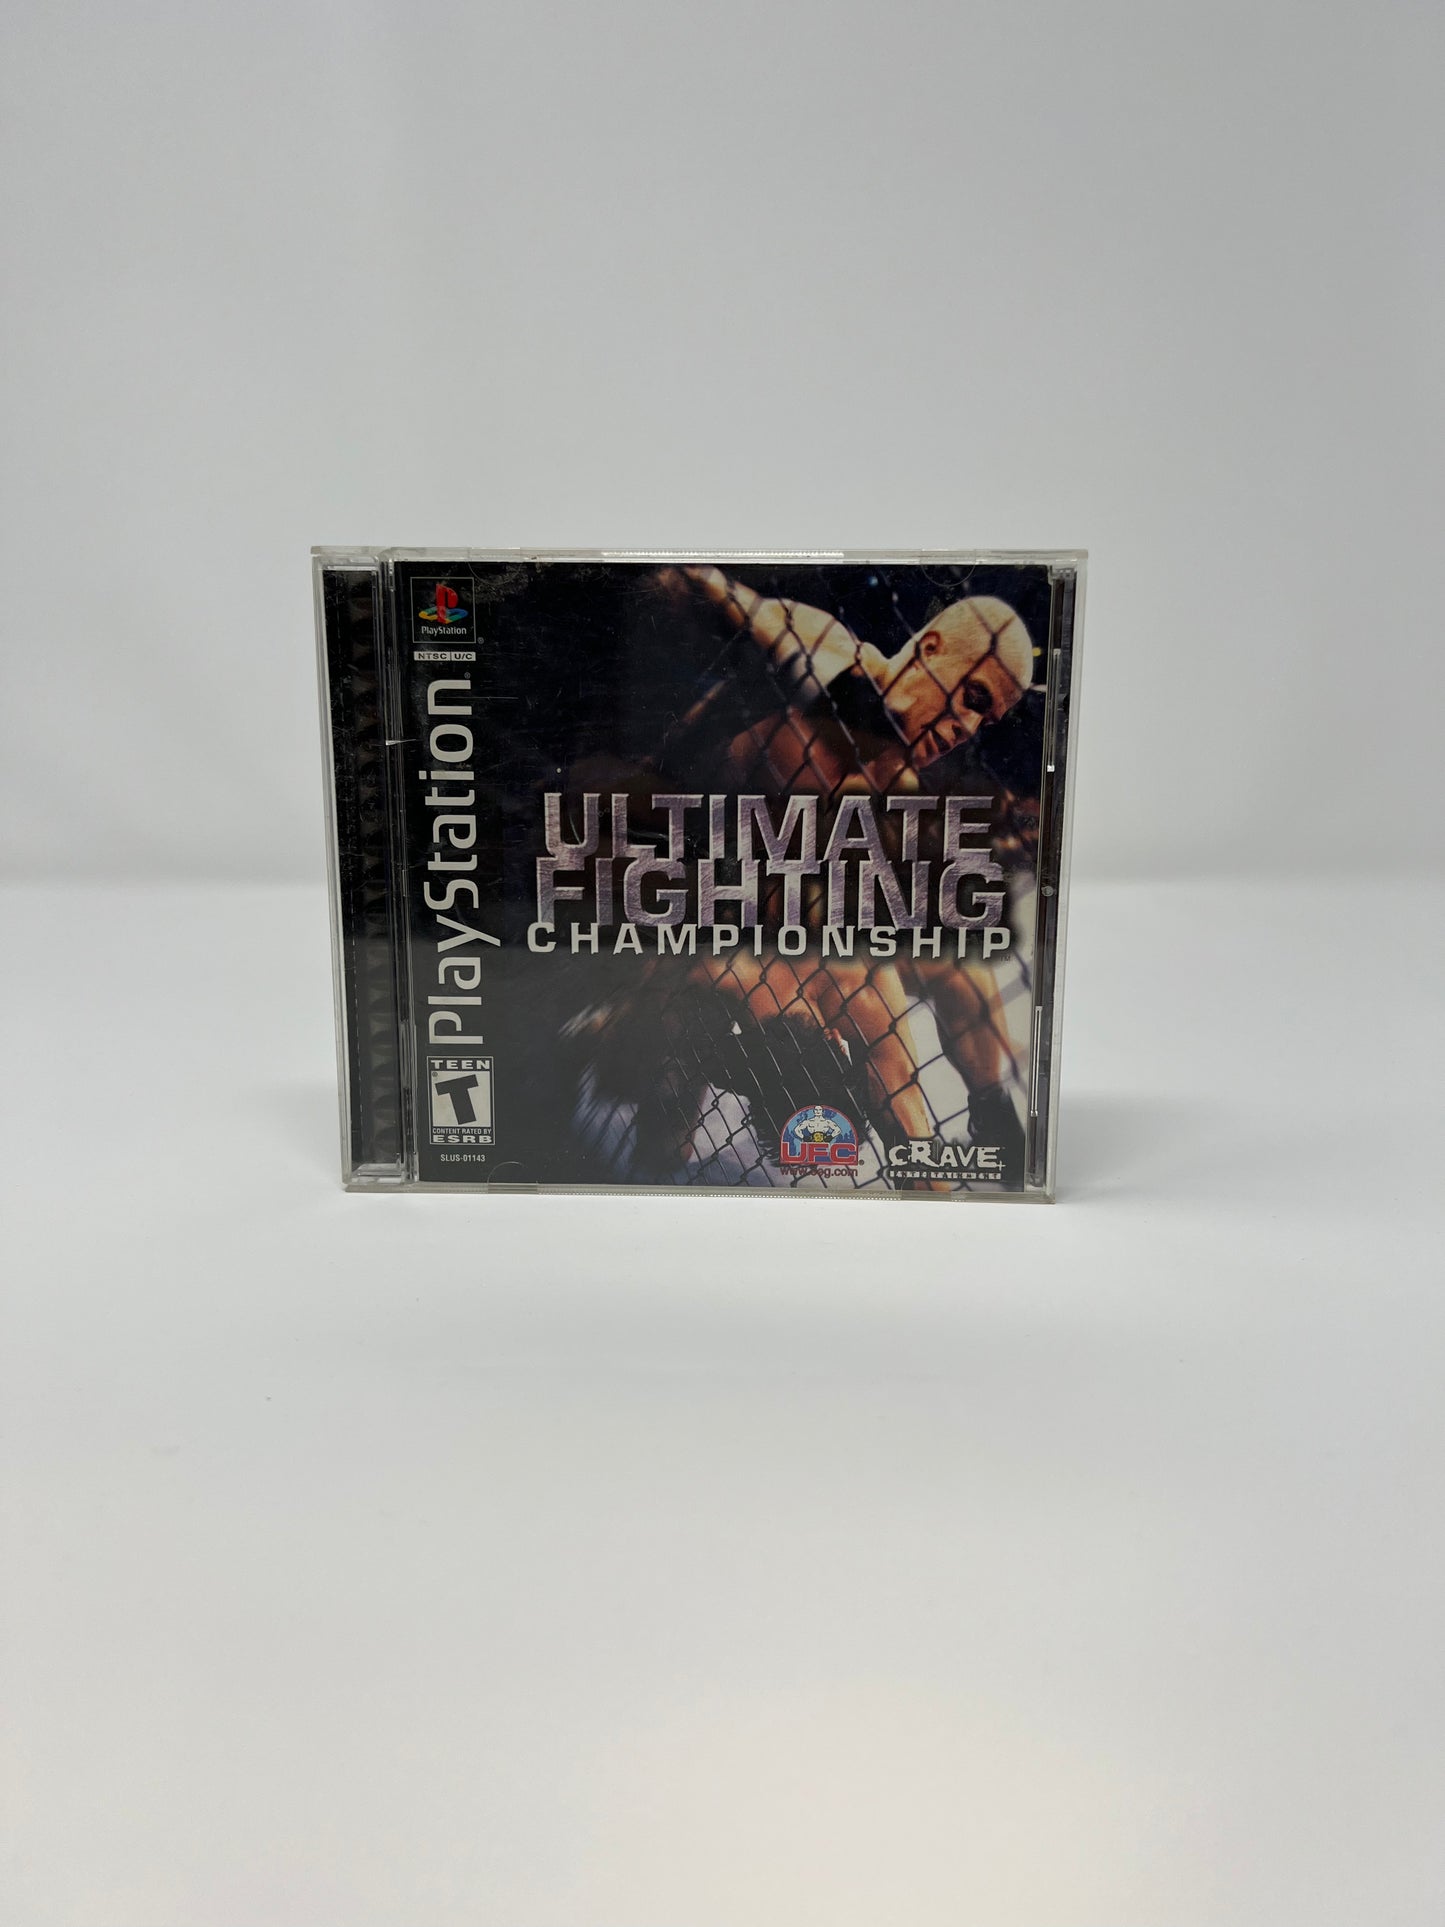 Ultimate Fighting Championship - PS1 Game - Used